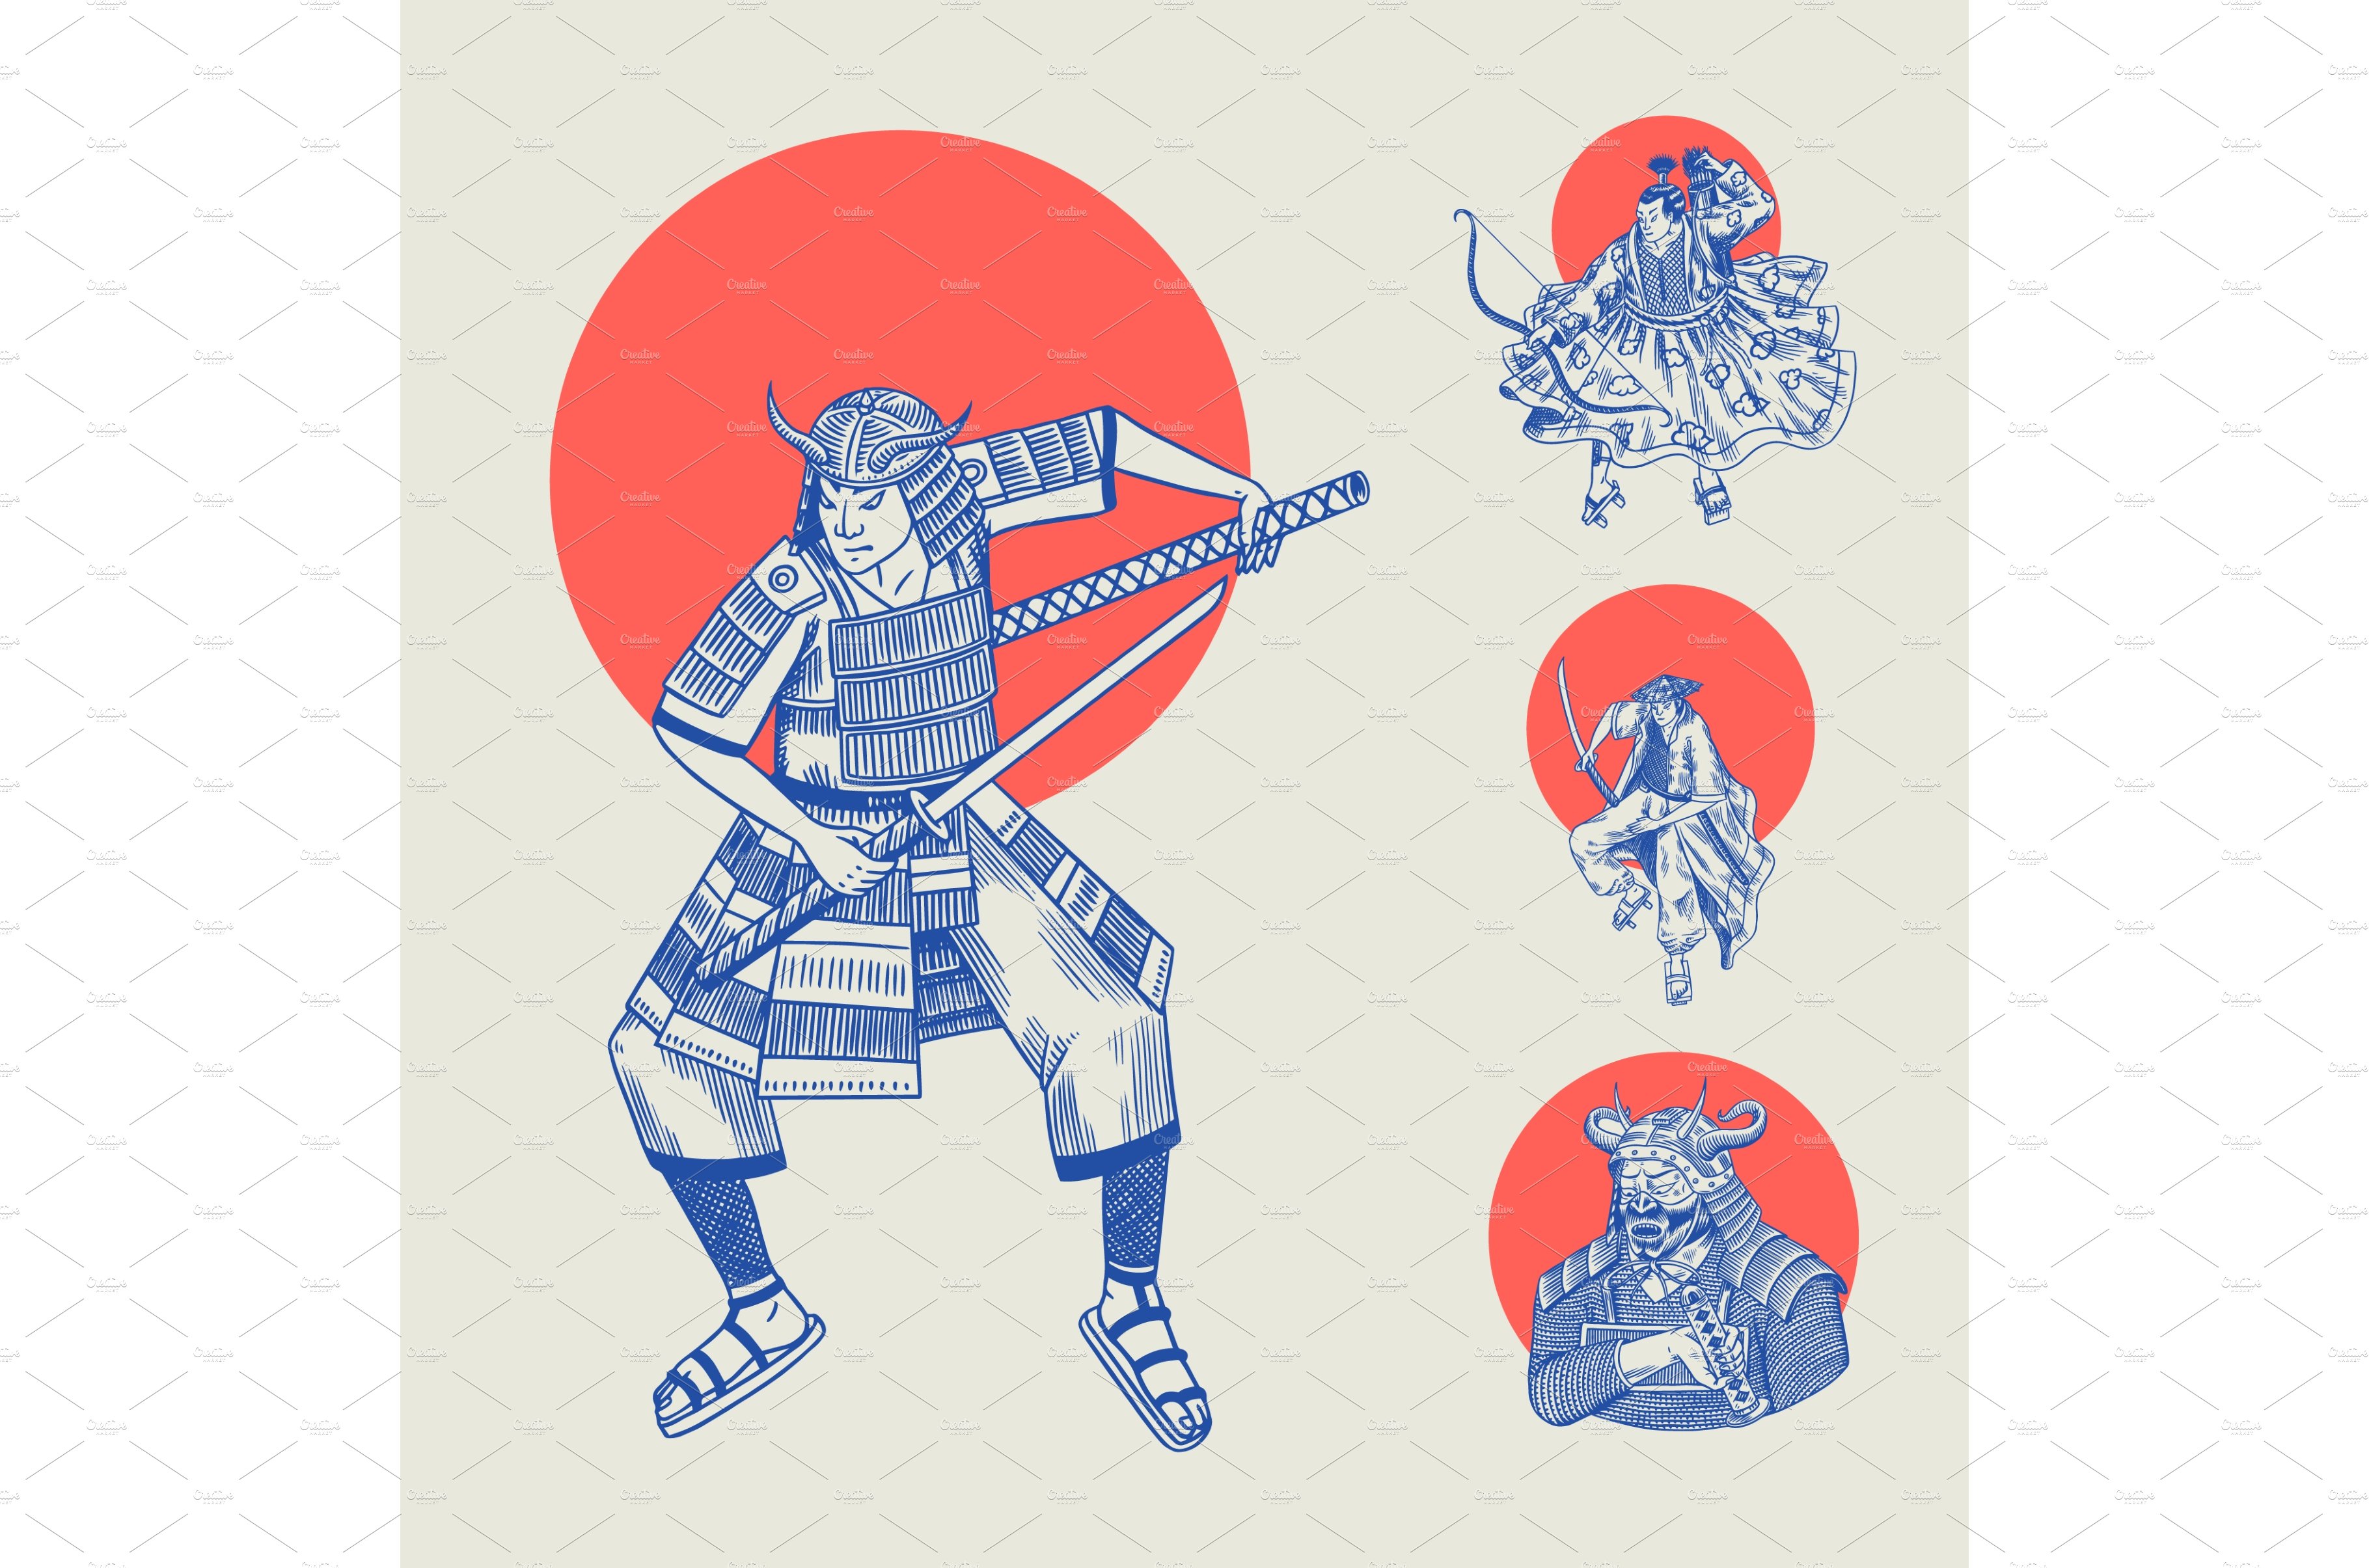 Japanese samurai and red sun cover image.